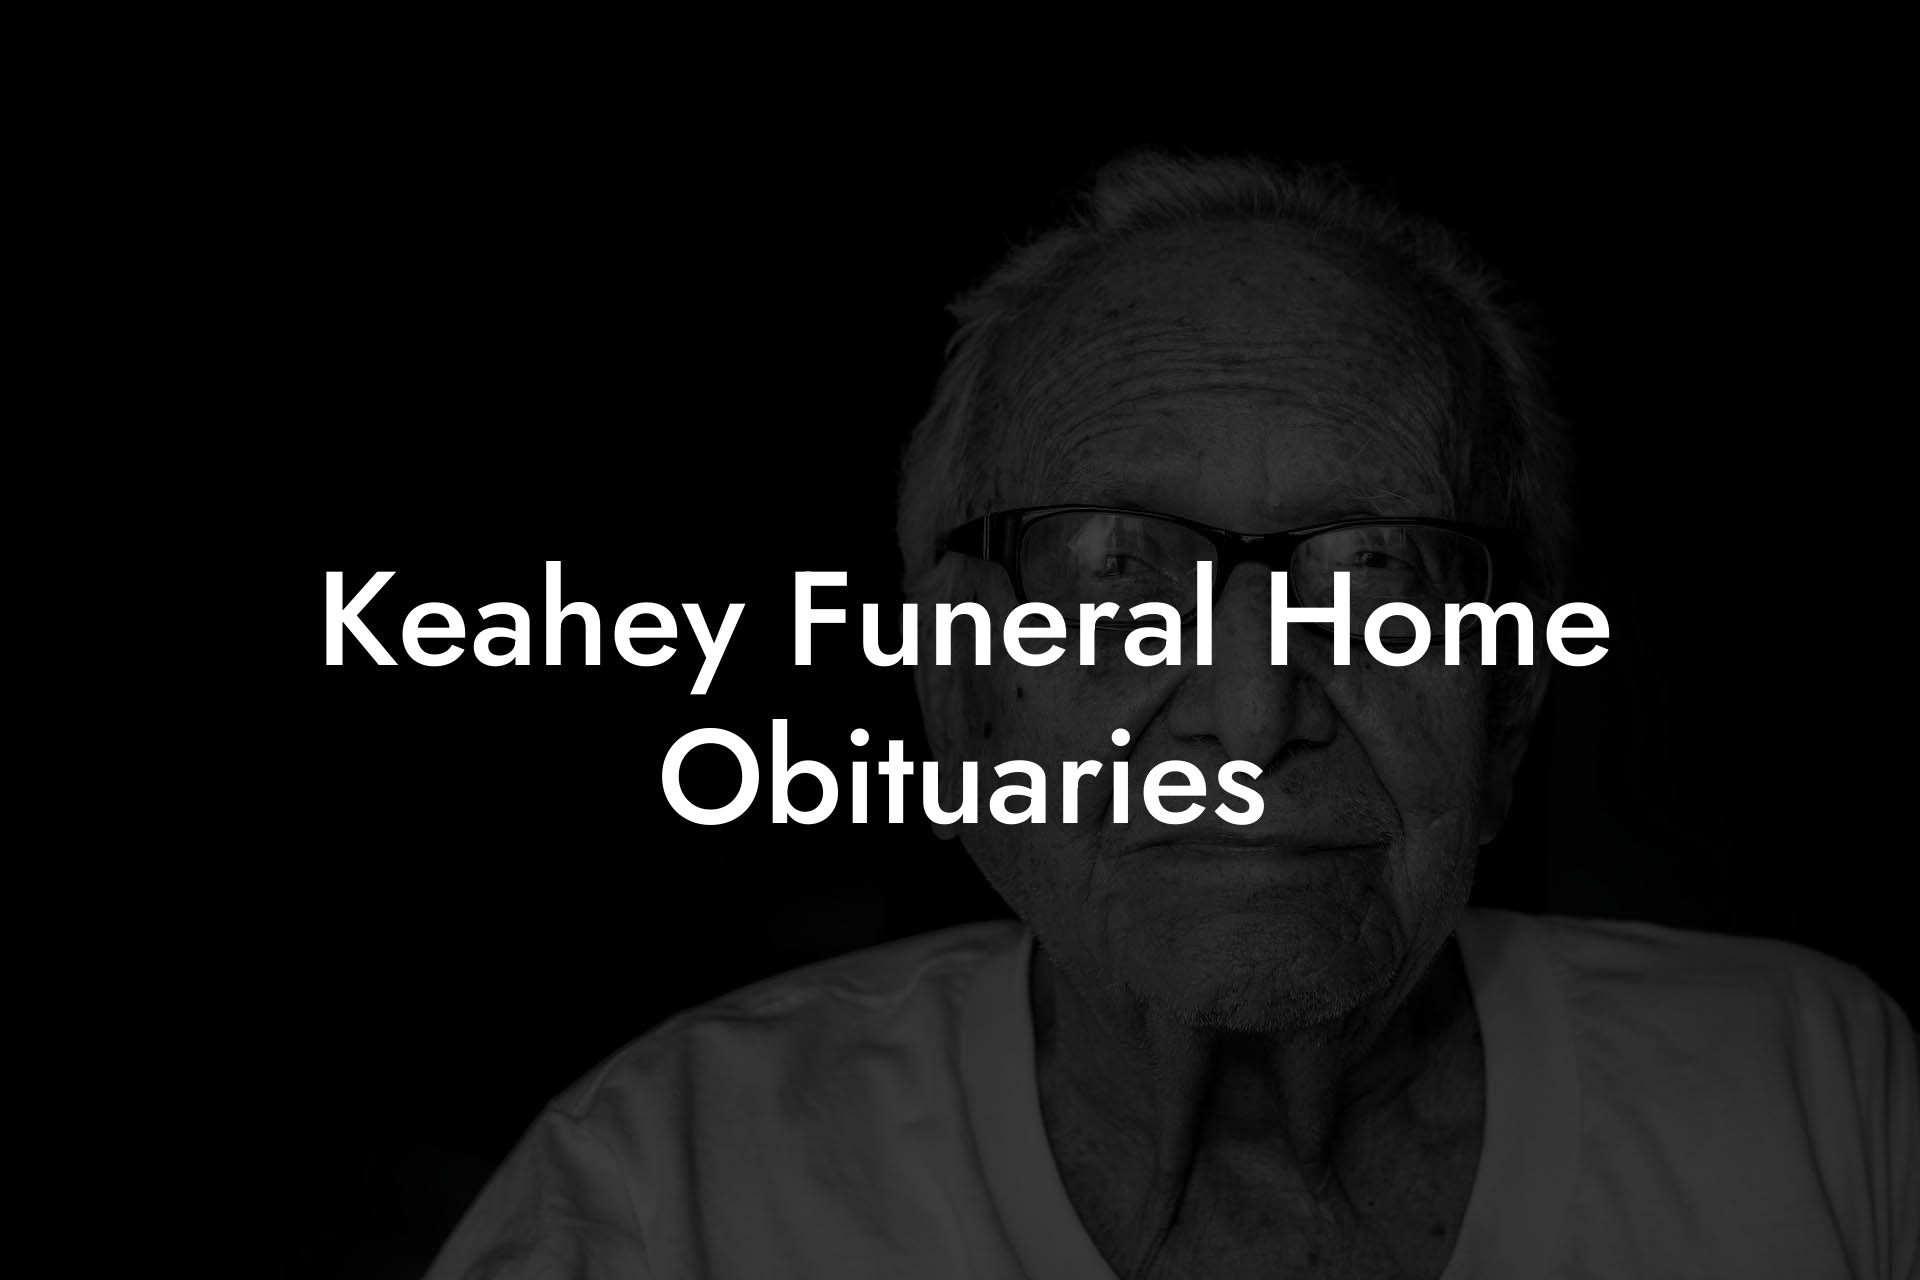 Keahey Funeral Home Obituaries